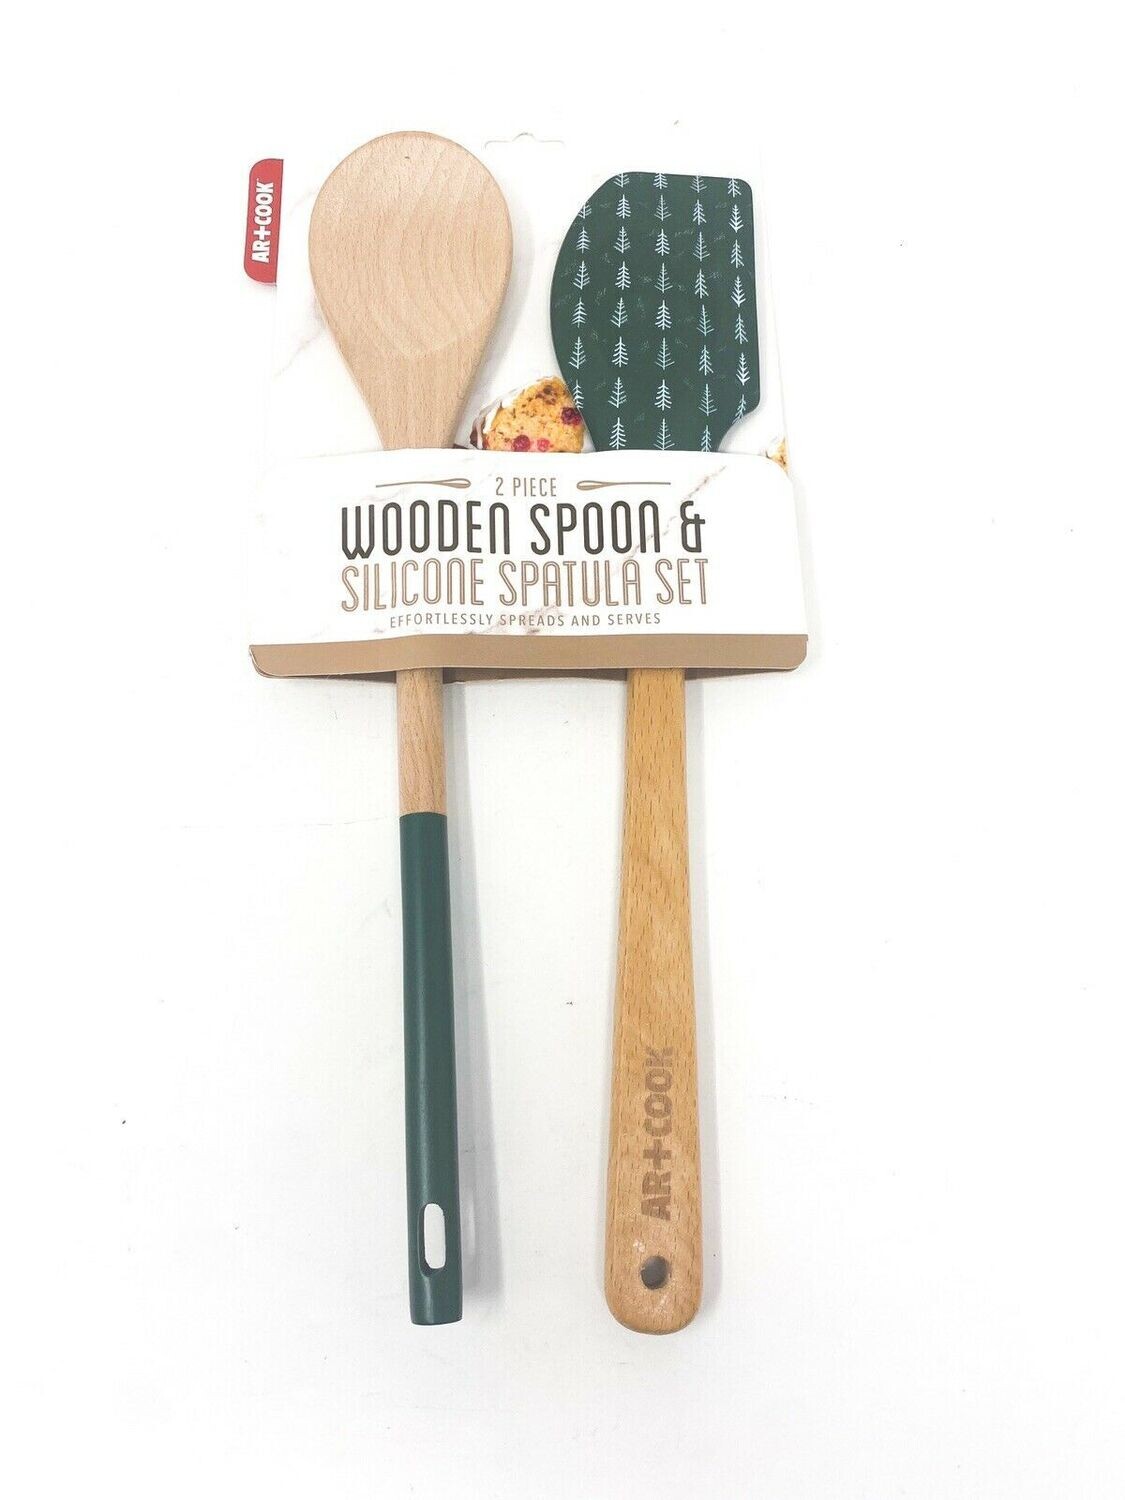 Art & Cook 2 Piece Holiday Wooden Spoon & Silicone Spatula Set